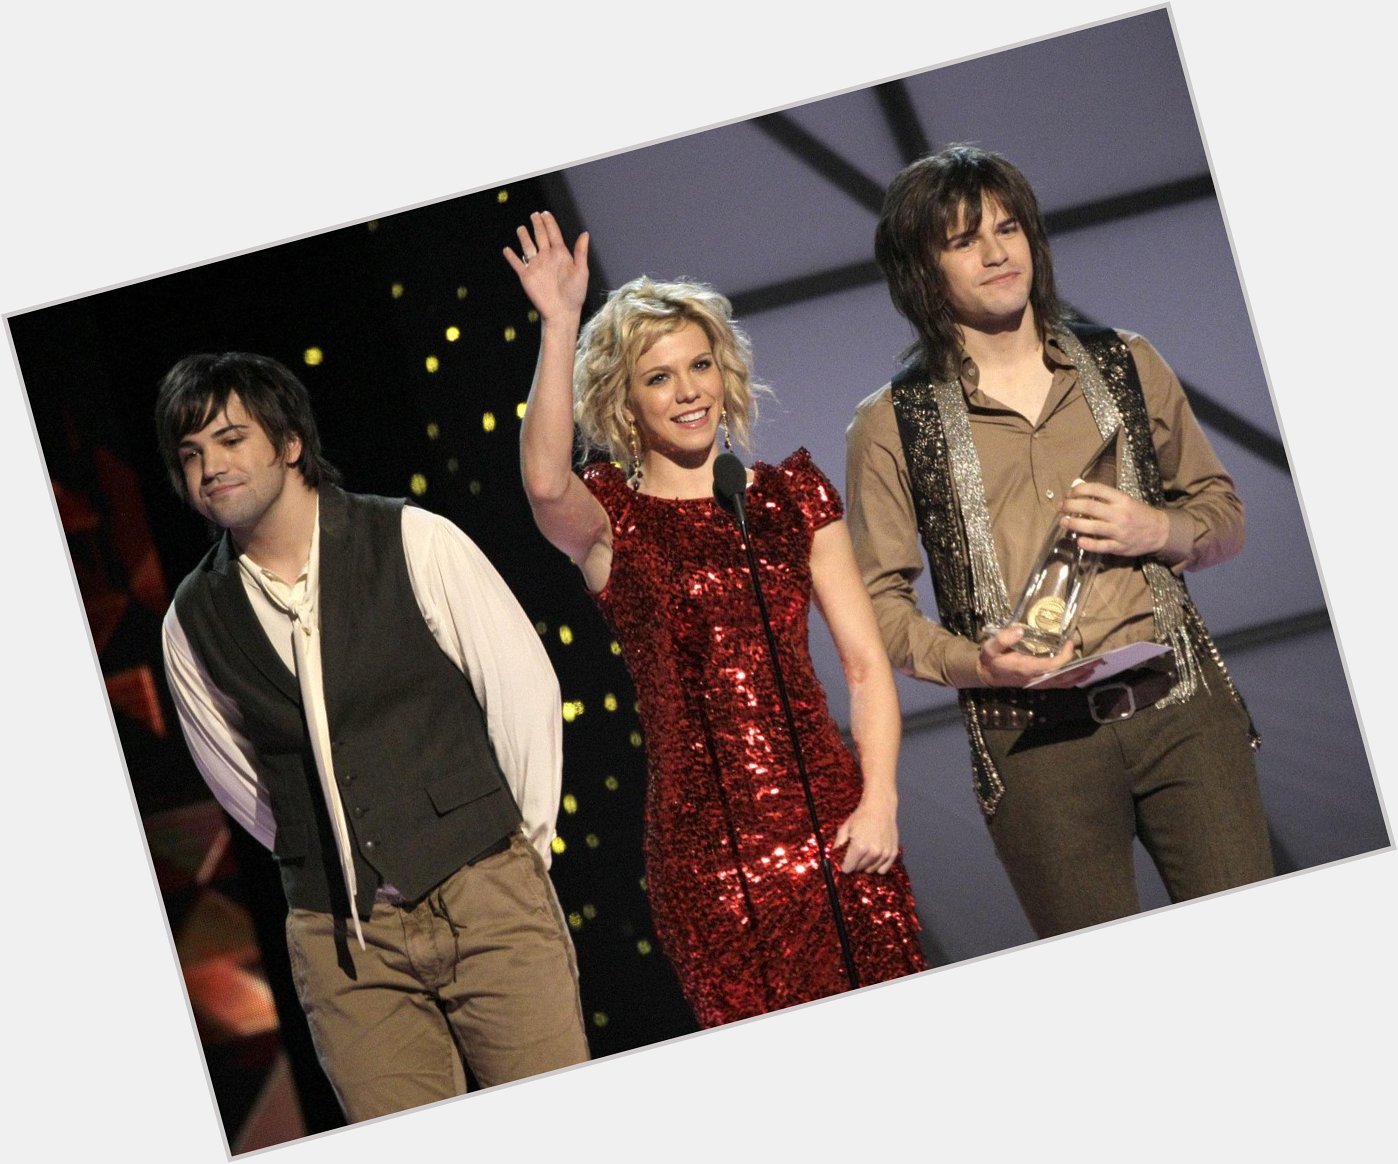 Happy Birthday to Neil Perry one-third of The Band Perry.  